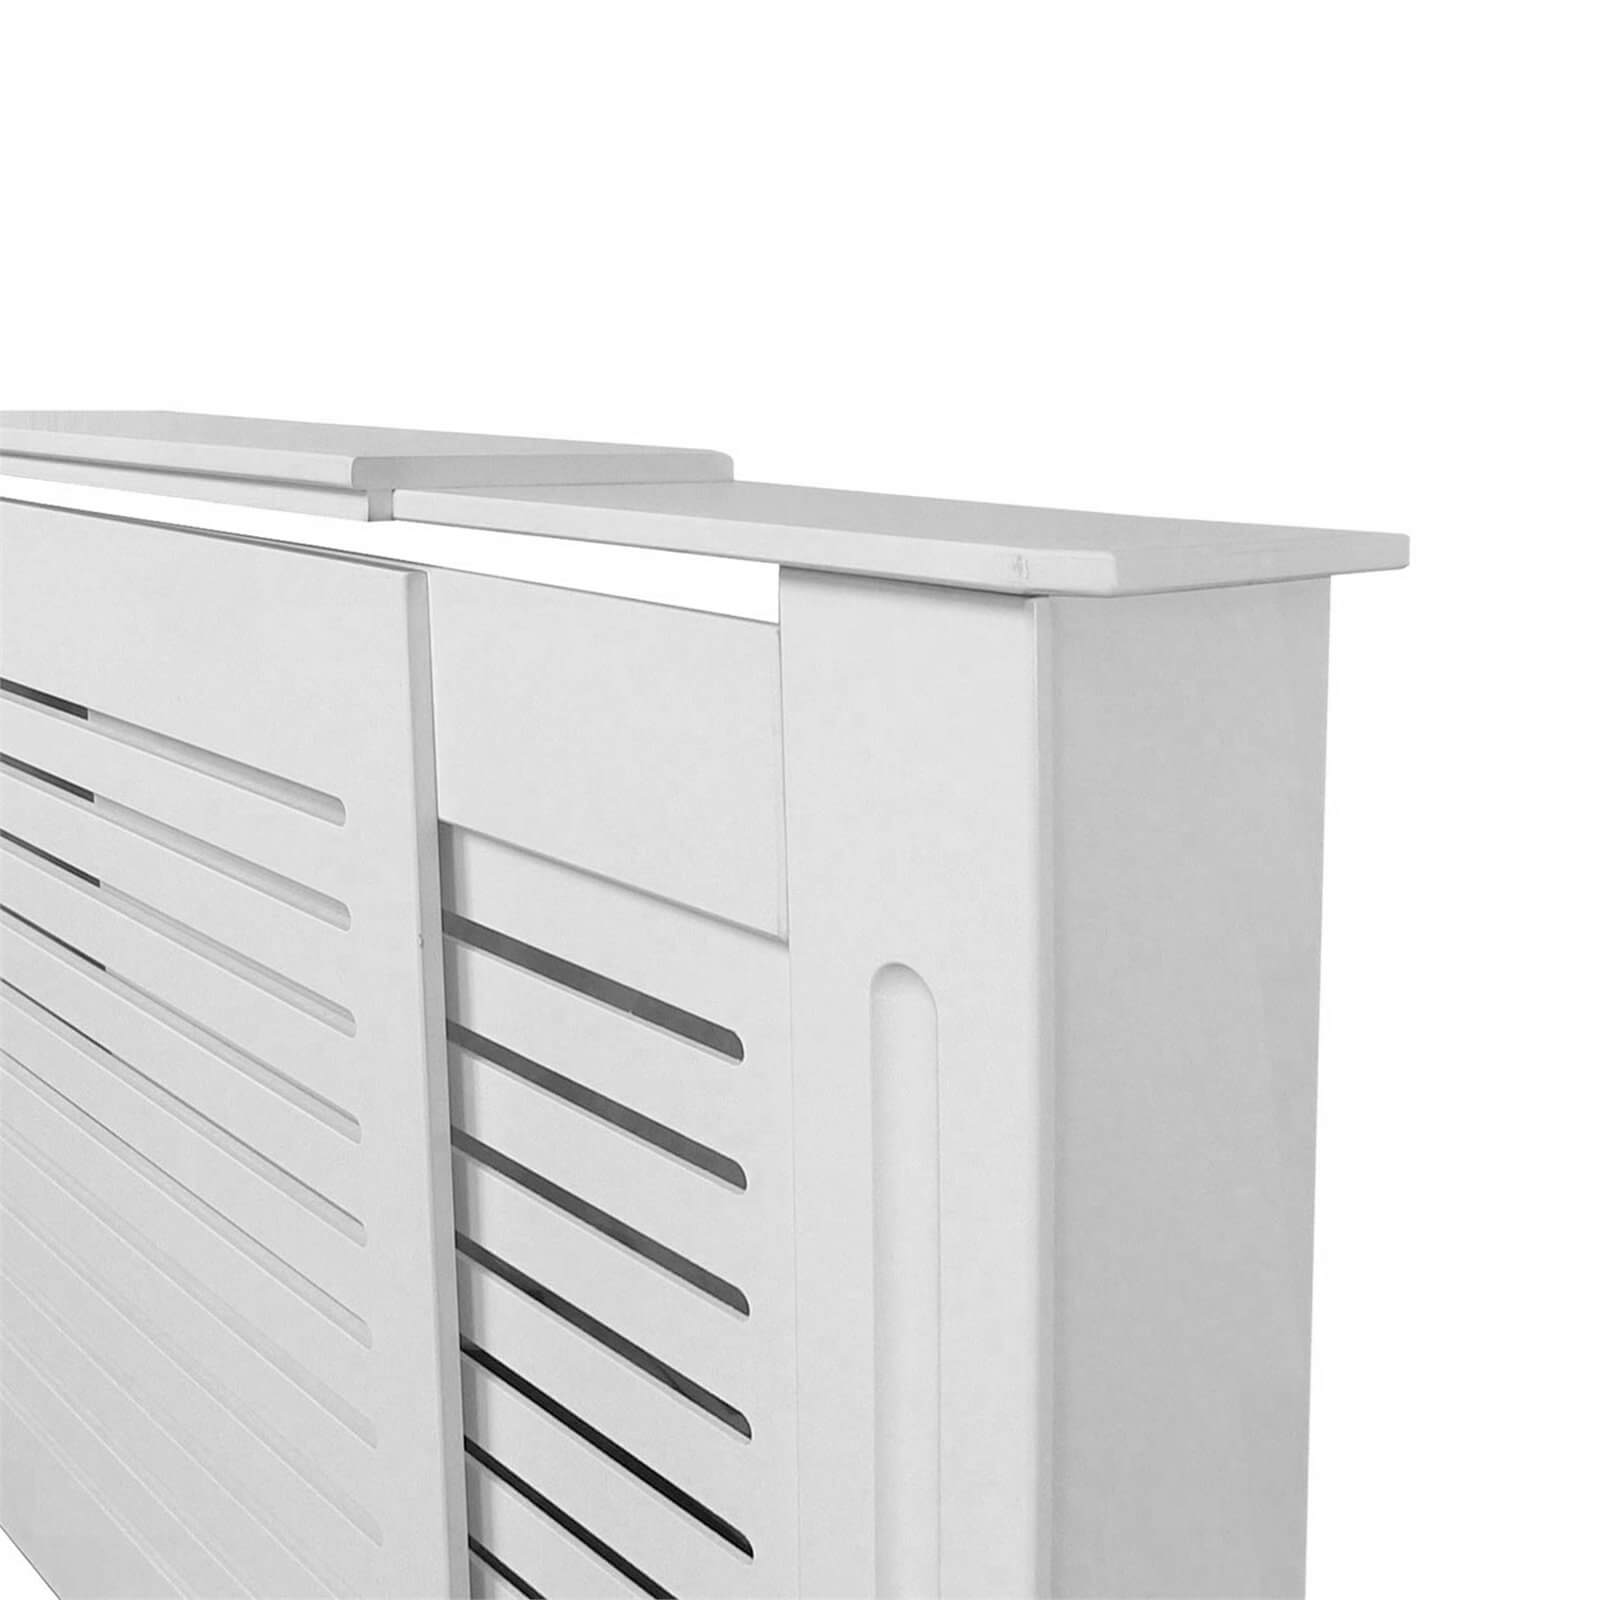 Radiator Cover with Horizontal Slatted Design in White - Adjustable